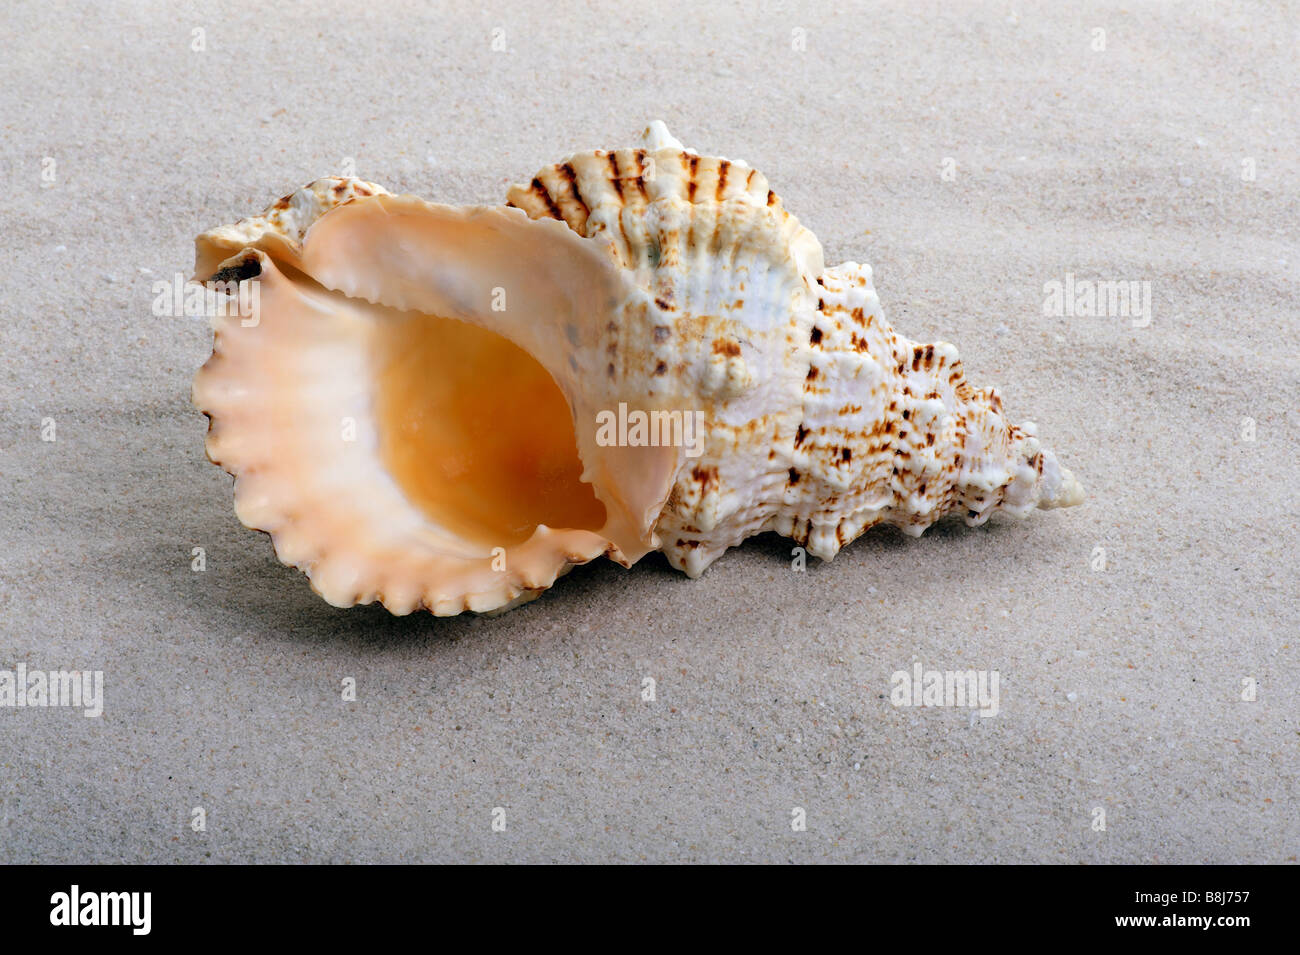 One big shell on the sand background Stock Photo